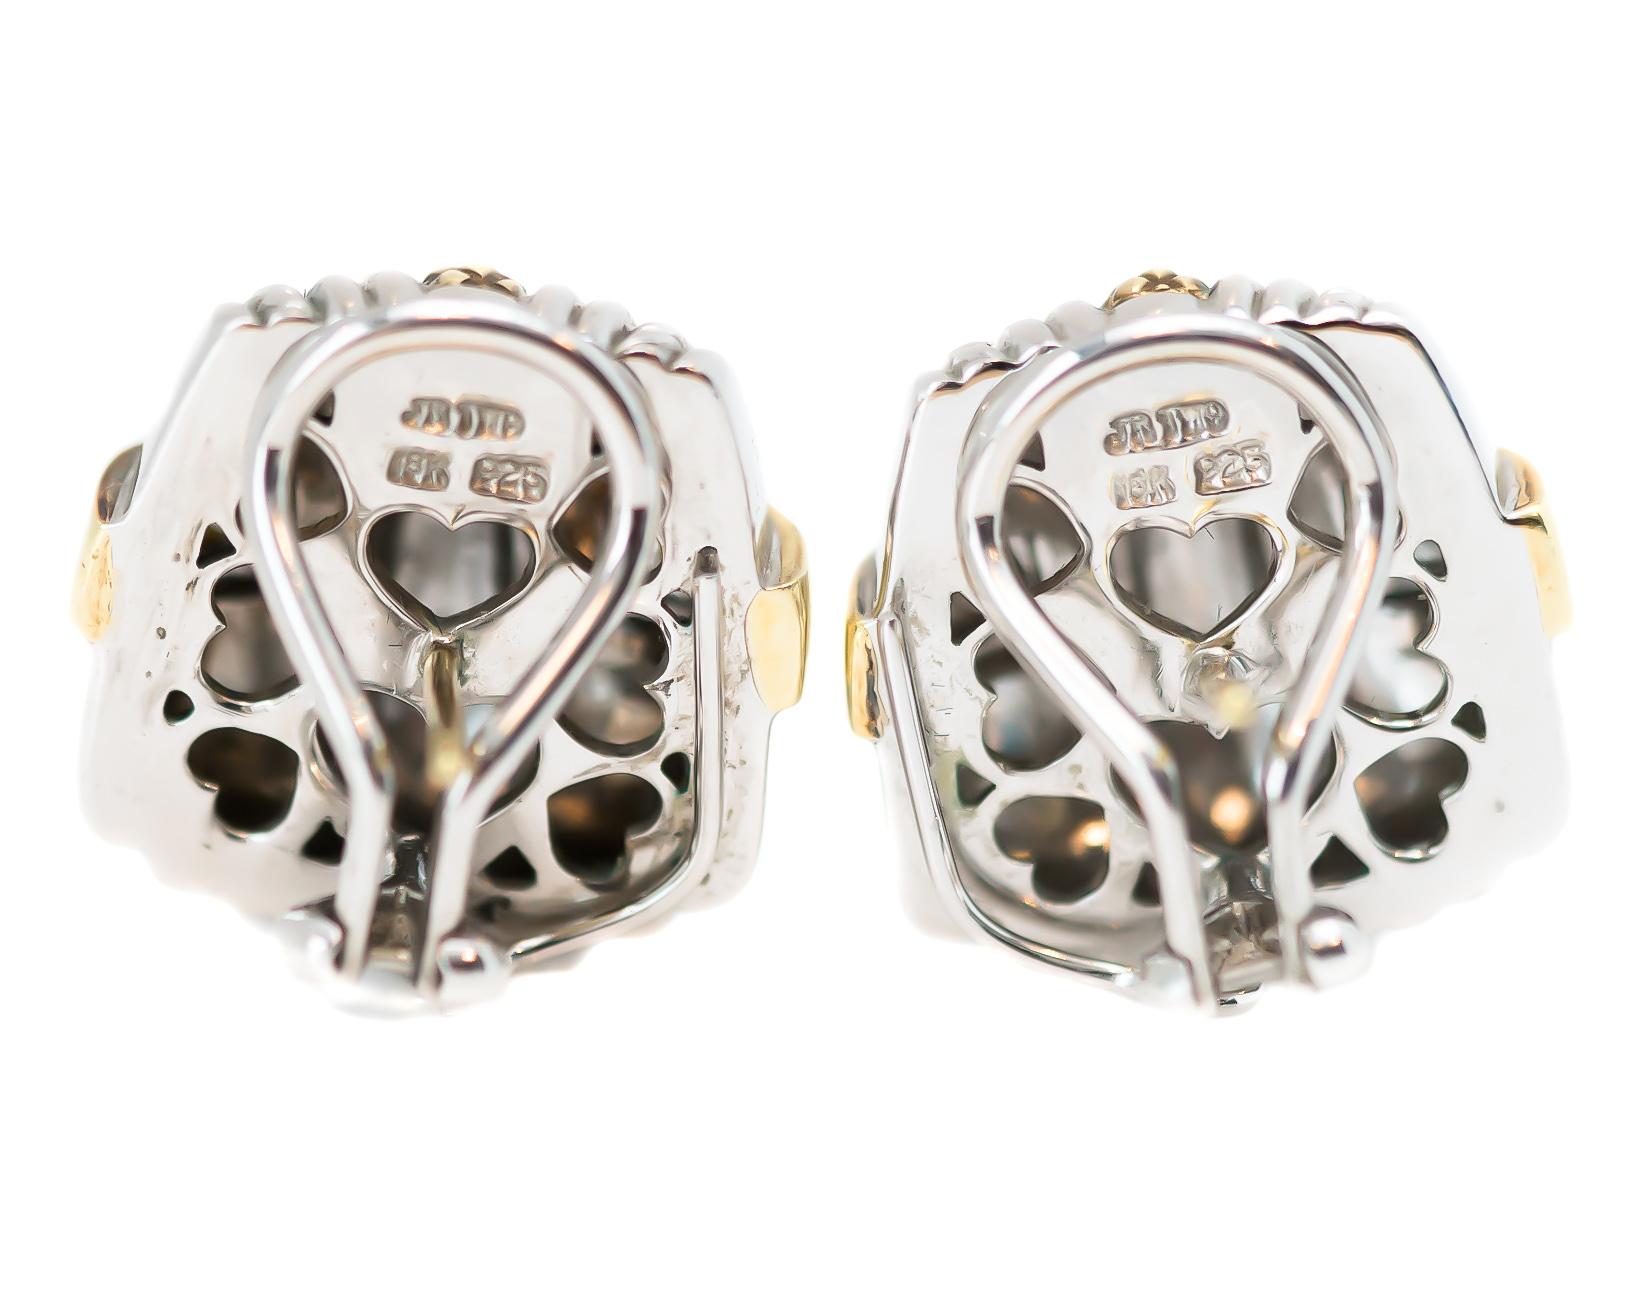 Judith Ripka Huggie Post Earrings - Sterling Silver, 18 Karat Yellow Gold, Diamonds

Features:
Sterling Silver
18 Karat Yellow Gold 
Diamonds

Iconic designer Judith Ripka Design
Authentic Hallmark visible on back of each earring. 
Huggie Style